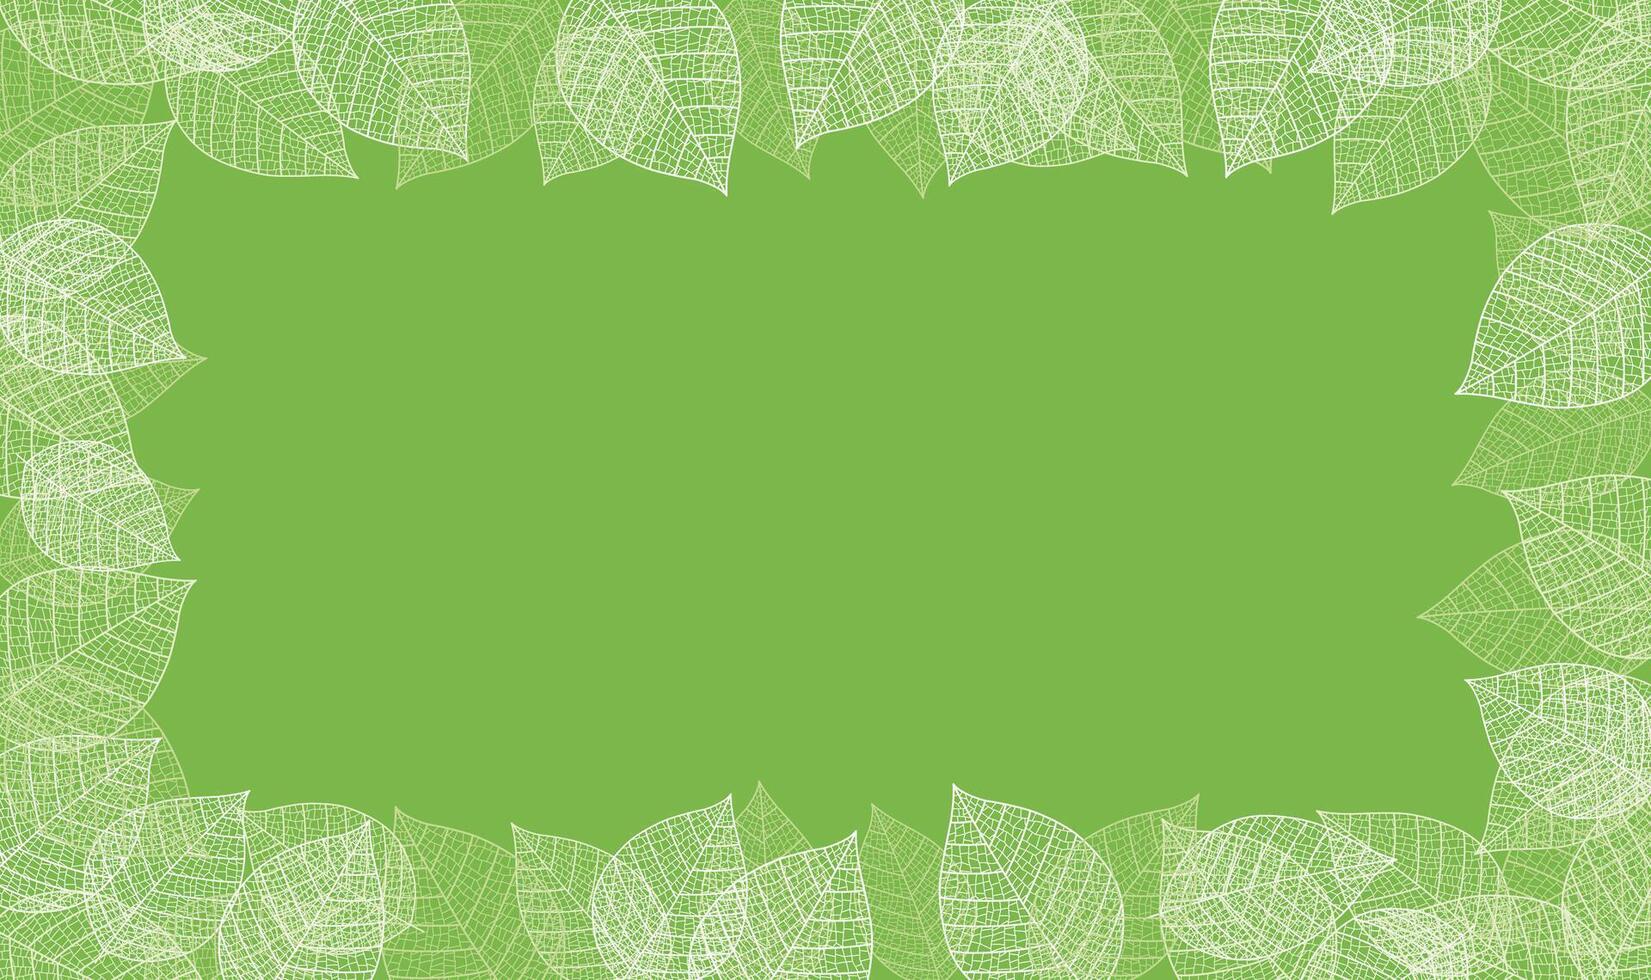 Vector Frame Illustration With Leaf Veins Silhouette Pattern Isolated On A Green Background.